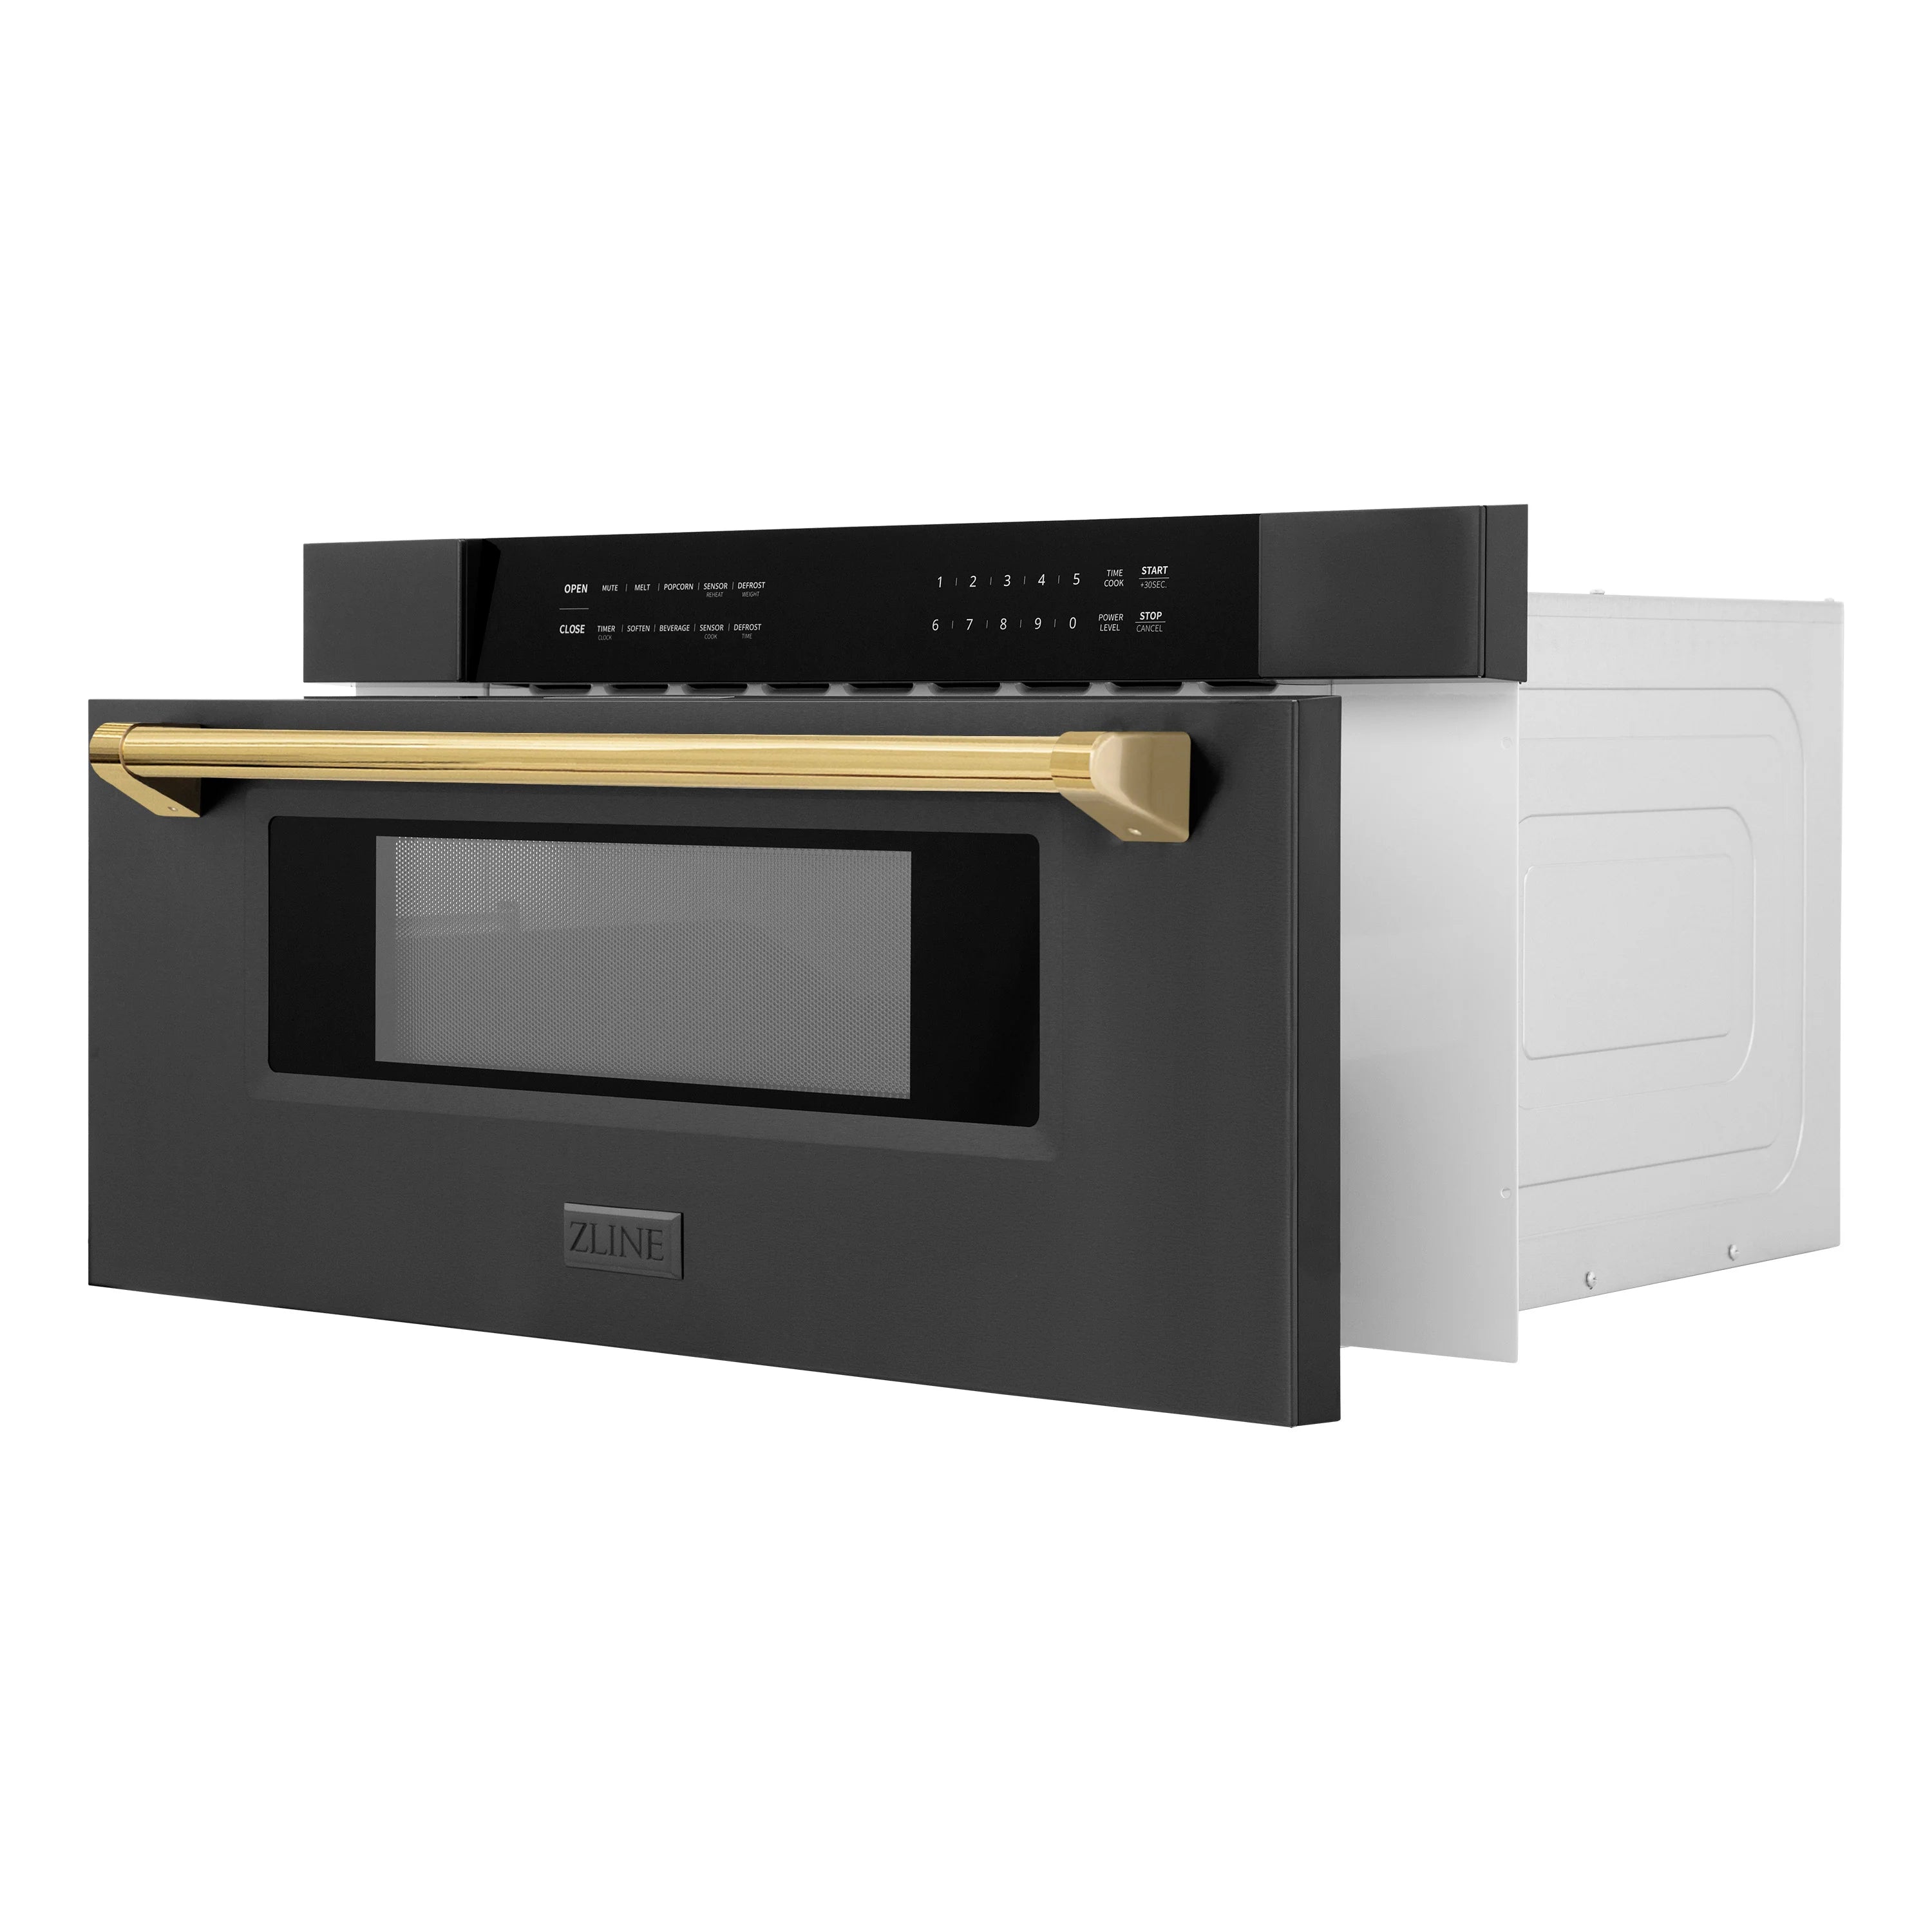 ZLINE Autograph Edition 30" 1.2 cu. ft. Built-in Microwave Drawer in Black Stainless Steel and Gold Accents (MWDZ-30-BS-G)